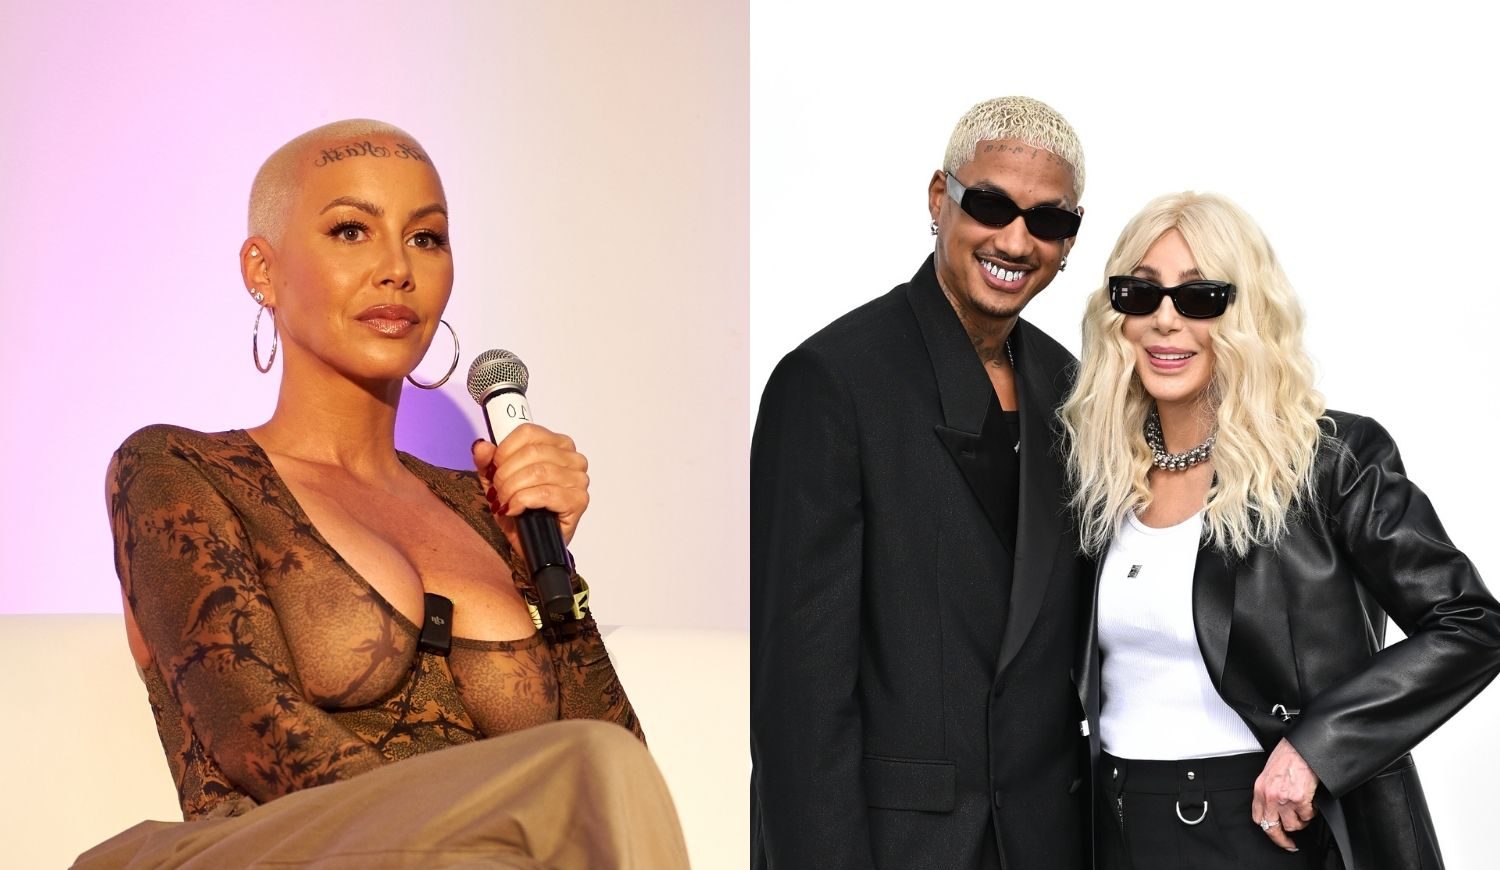 Period! Amber Rose Shares Why She Isn’t Pressed About Her Ex-BF Alexander Edwards Dating Cher thumbnail